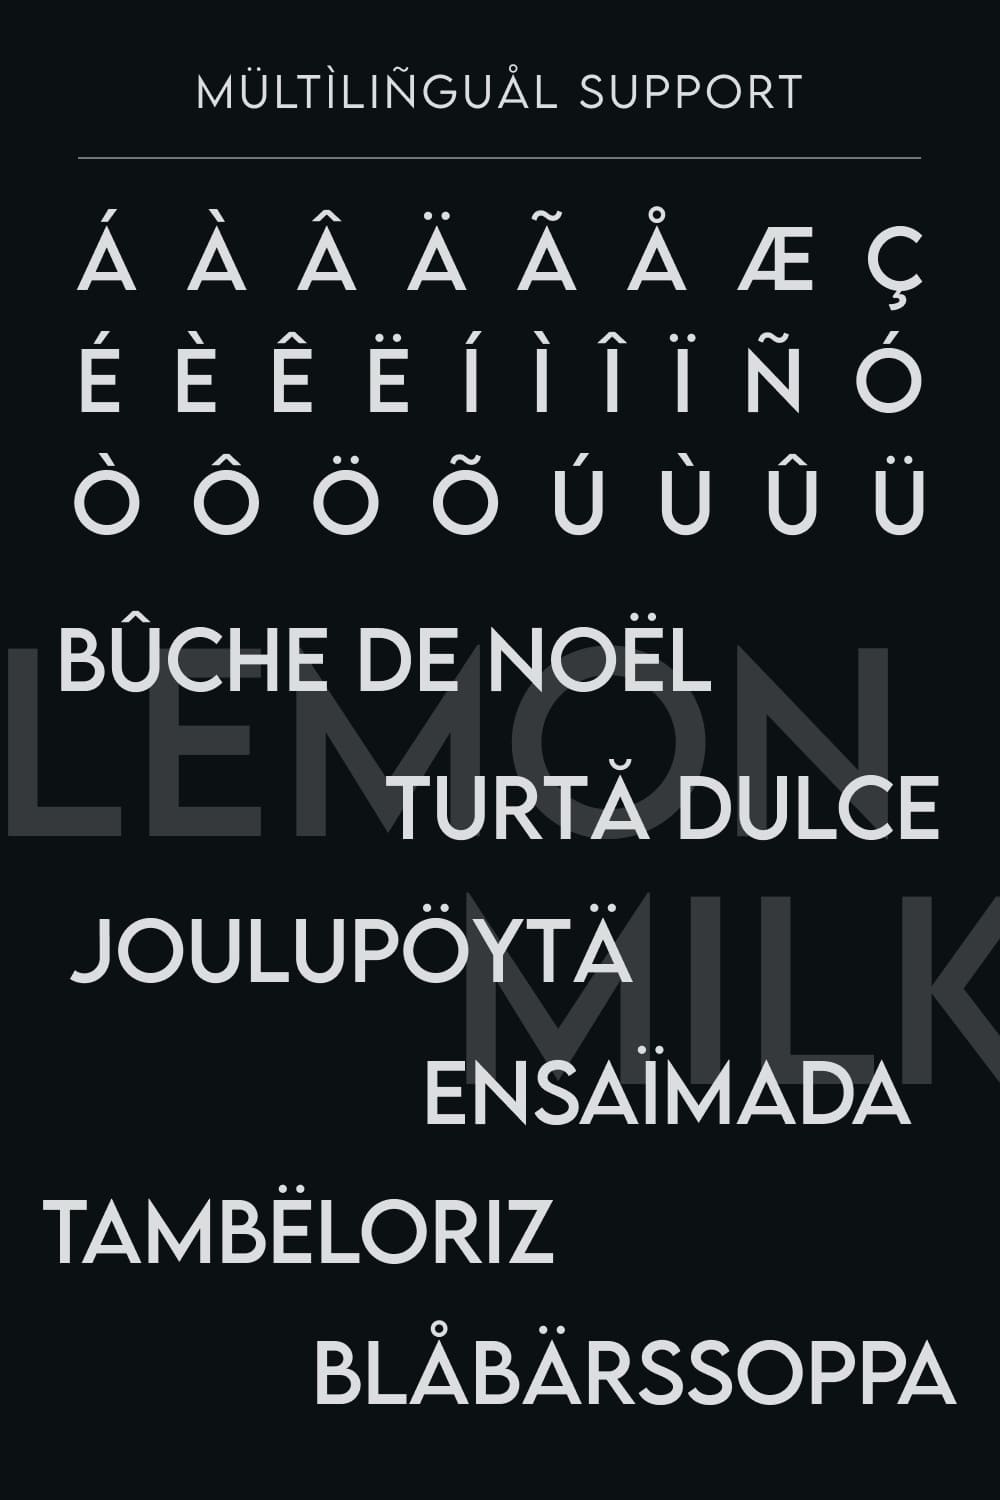 It is a multilingual font with a versatile style.